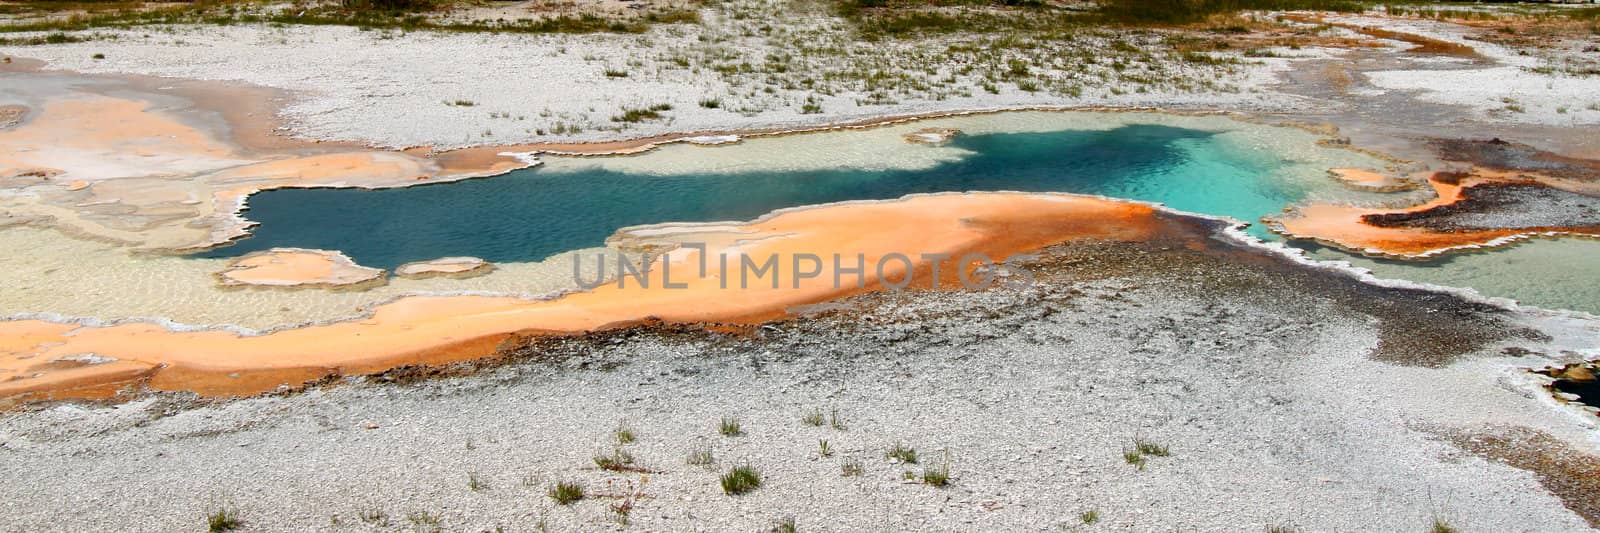 Doublet Pool - Yellowstone by Wirepec